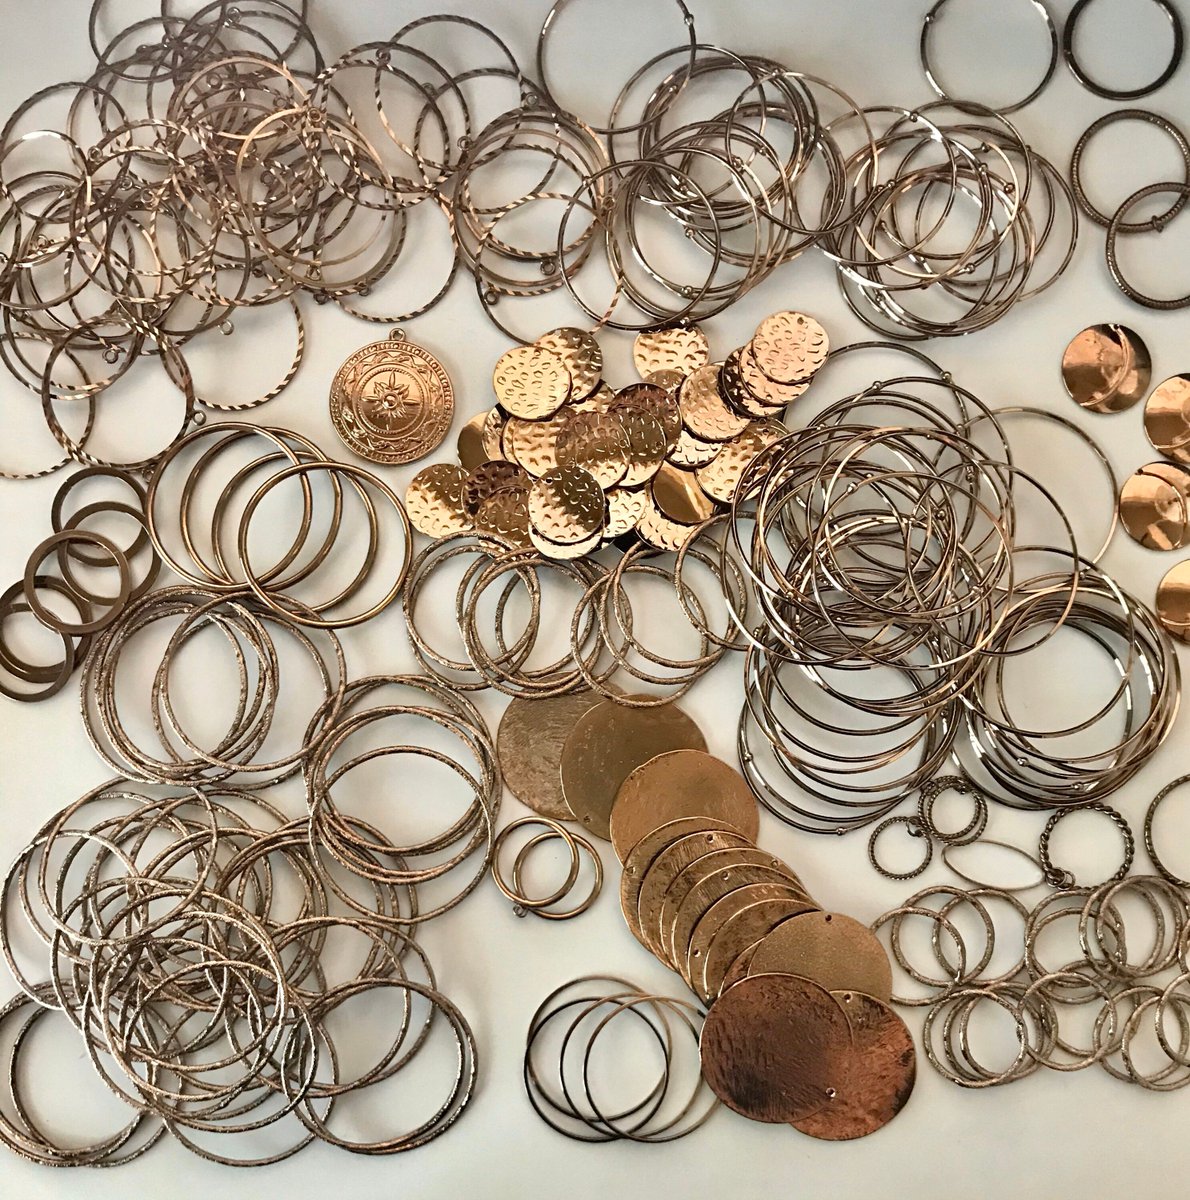 Jewelry Making Kit: Assorted Findings in Gunmetal Finish approx. Lot of about 400 pieces by BySupply tuppu.net/711f2e07 #Etsy #bysupply #Findings